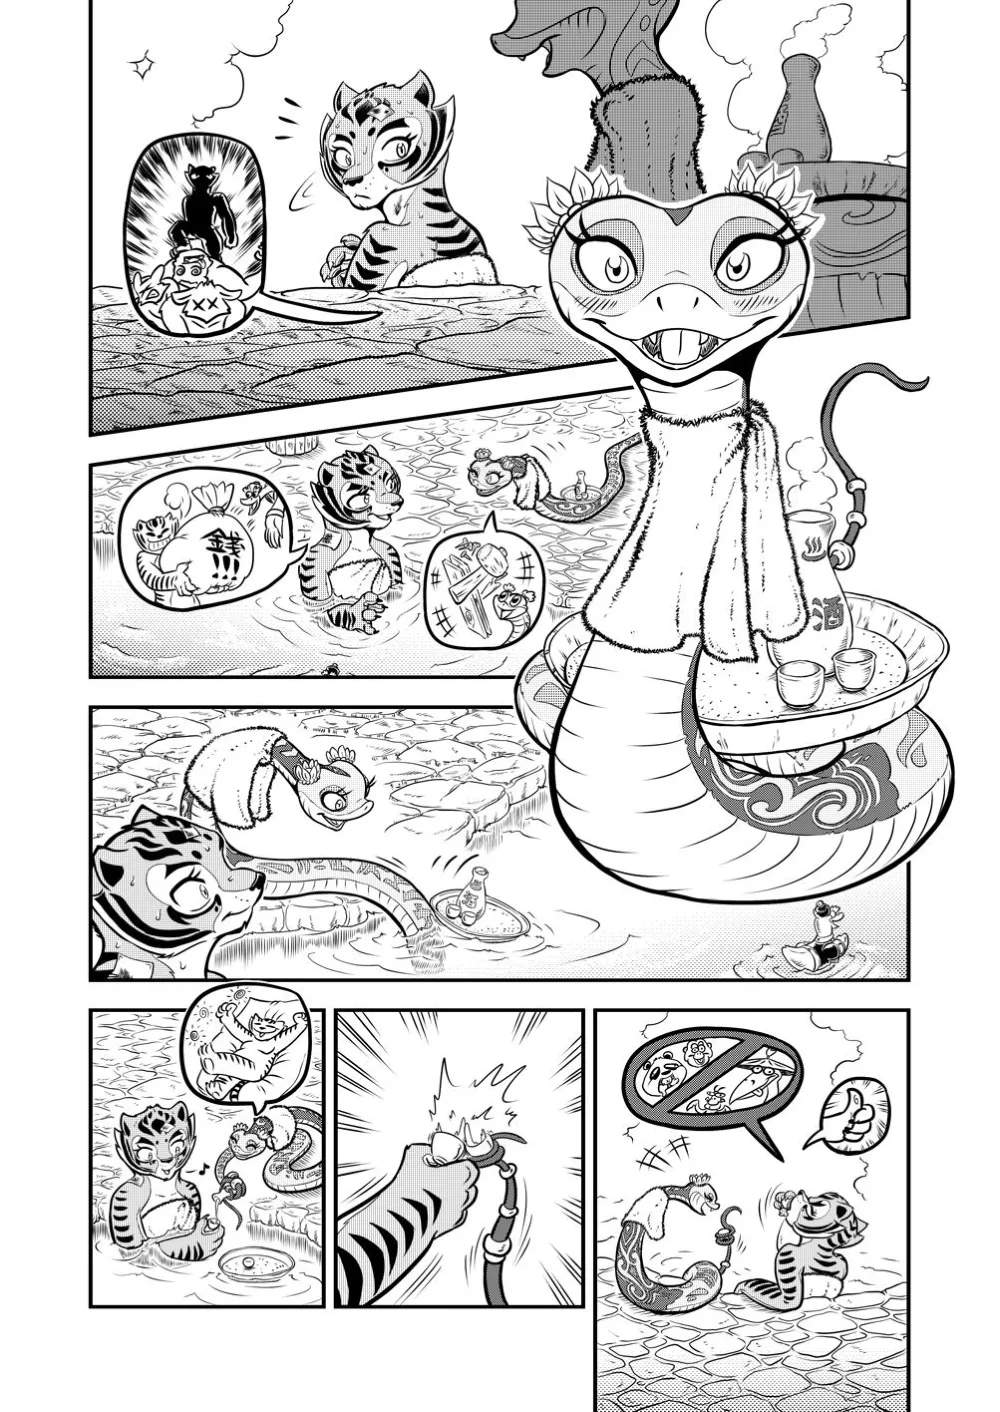 The Tiger Lilies in Bloom - Page 3